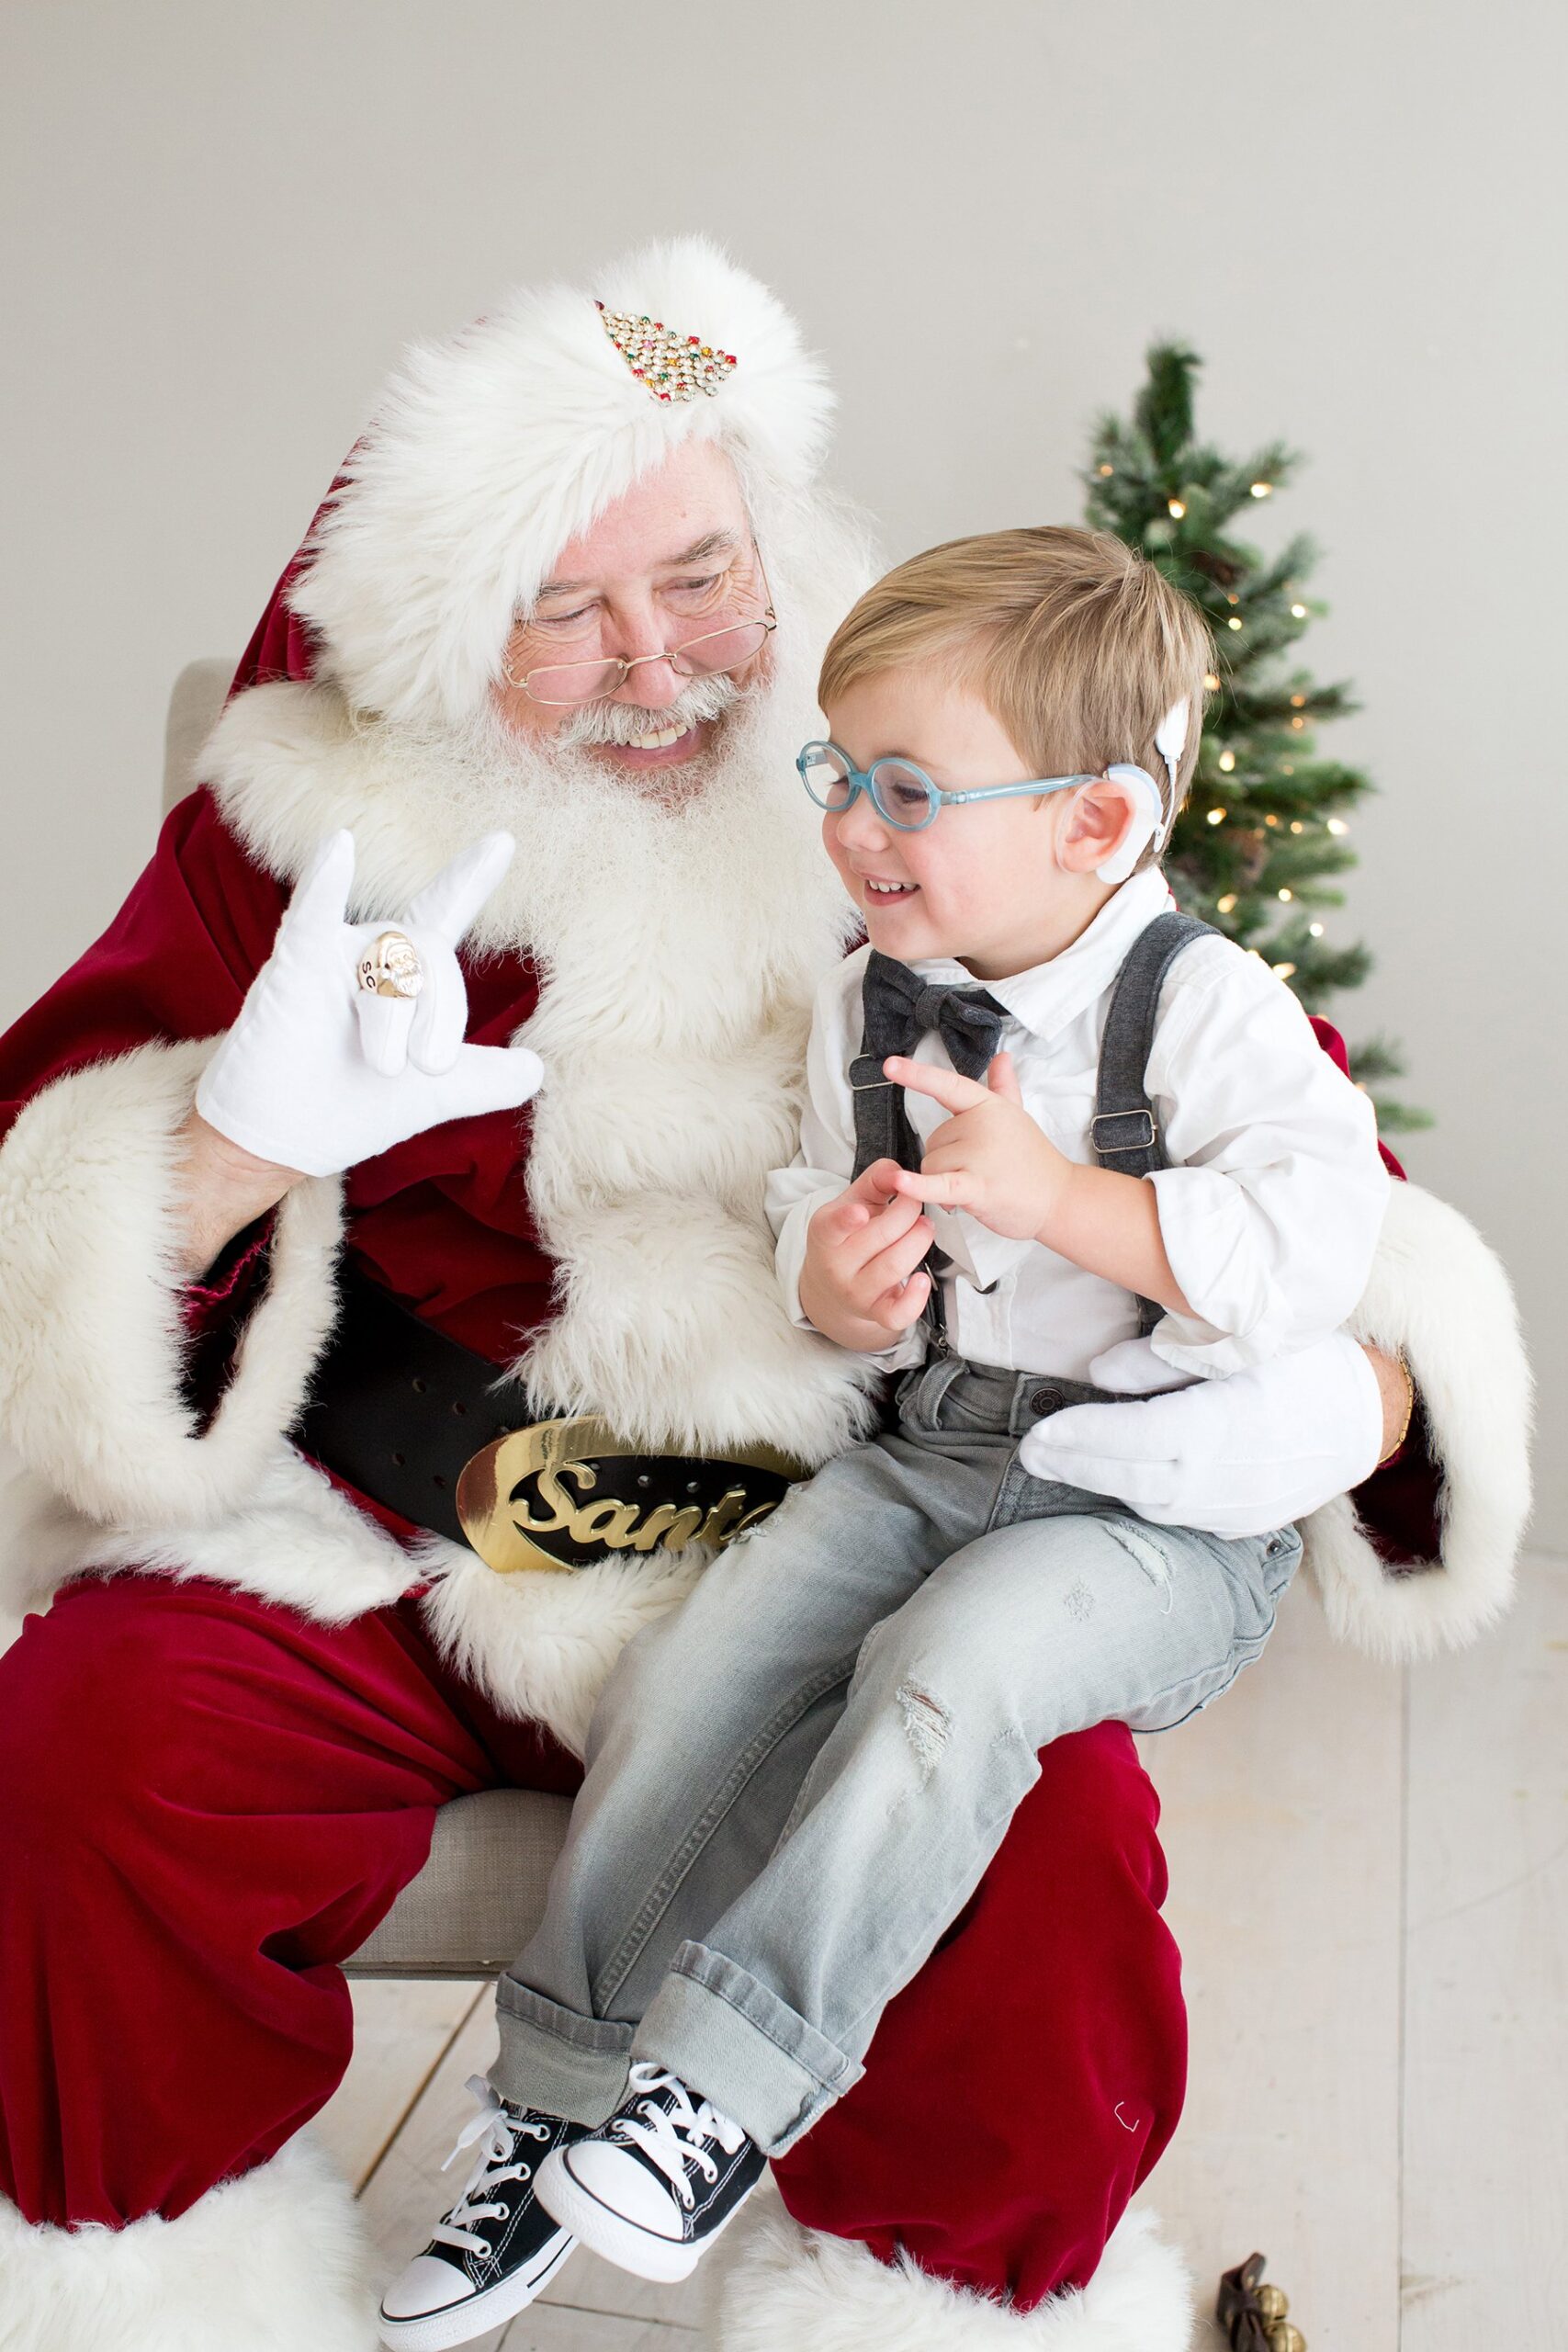 Santa signs I love you to boy at Julie Brock Photography in Louisville KY